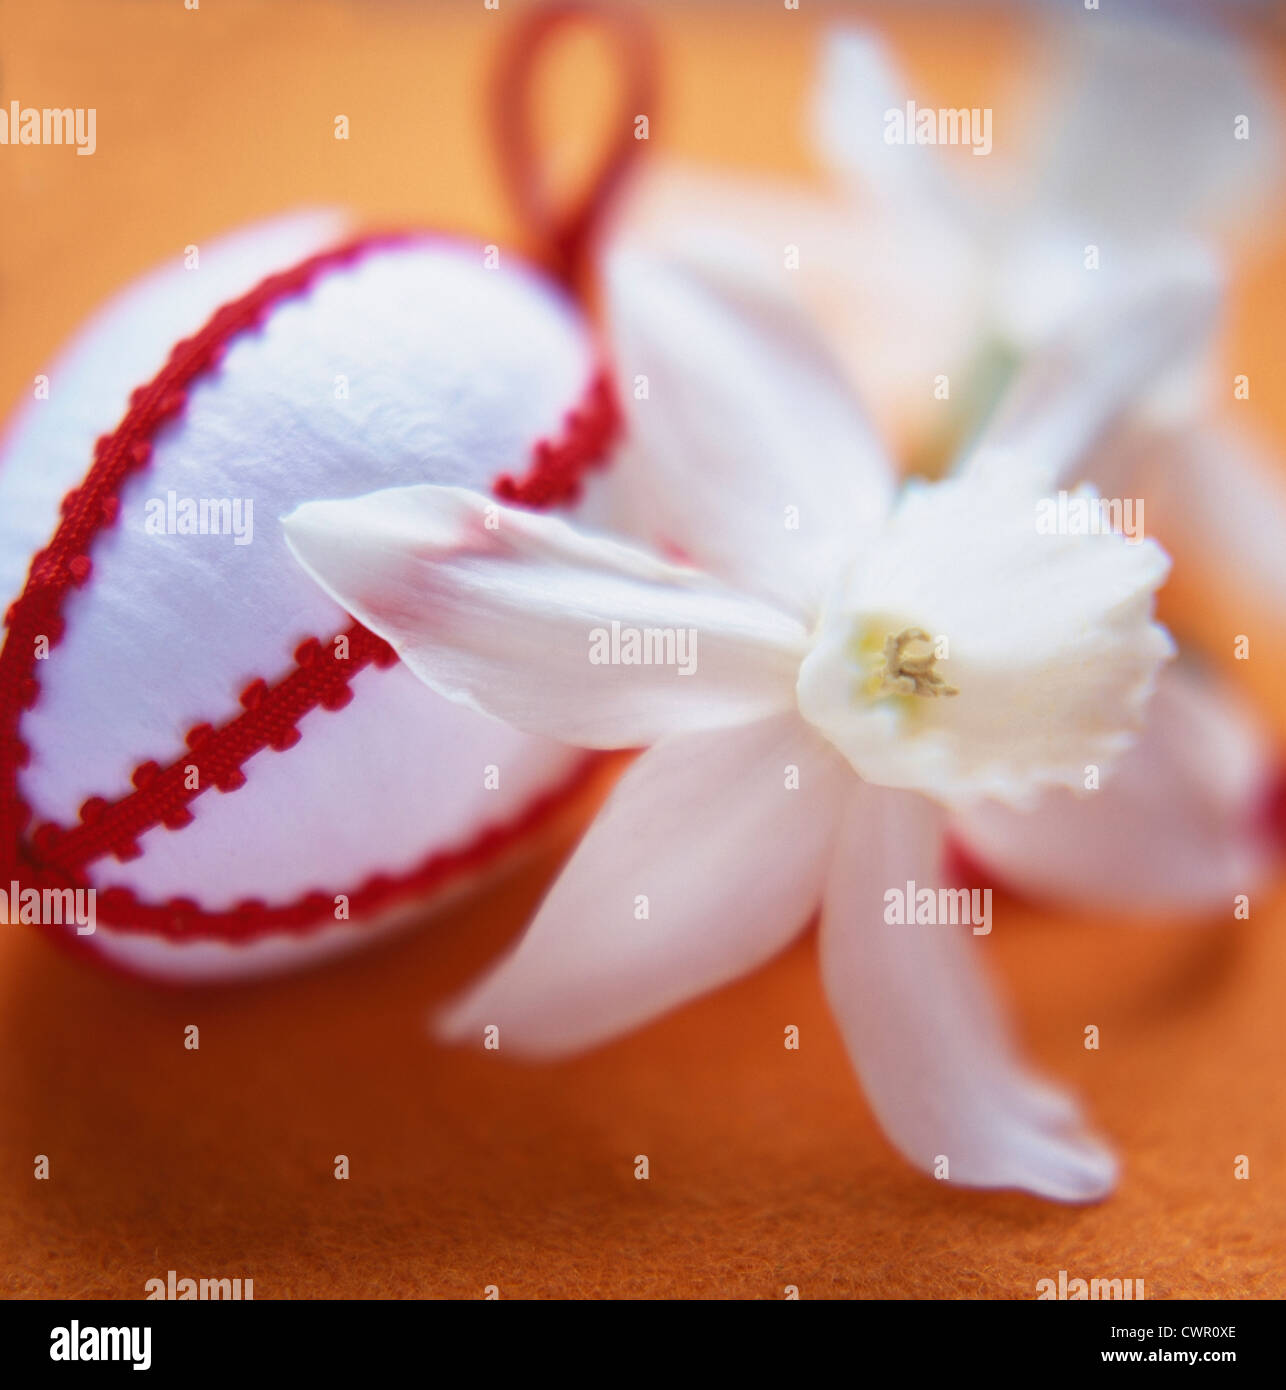 Narcissus, cut white flower beside a red and white fabric decoration. Stock Photo